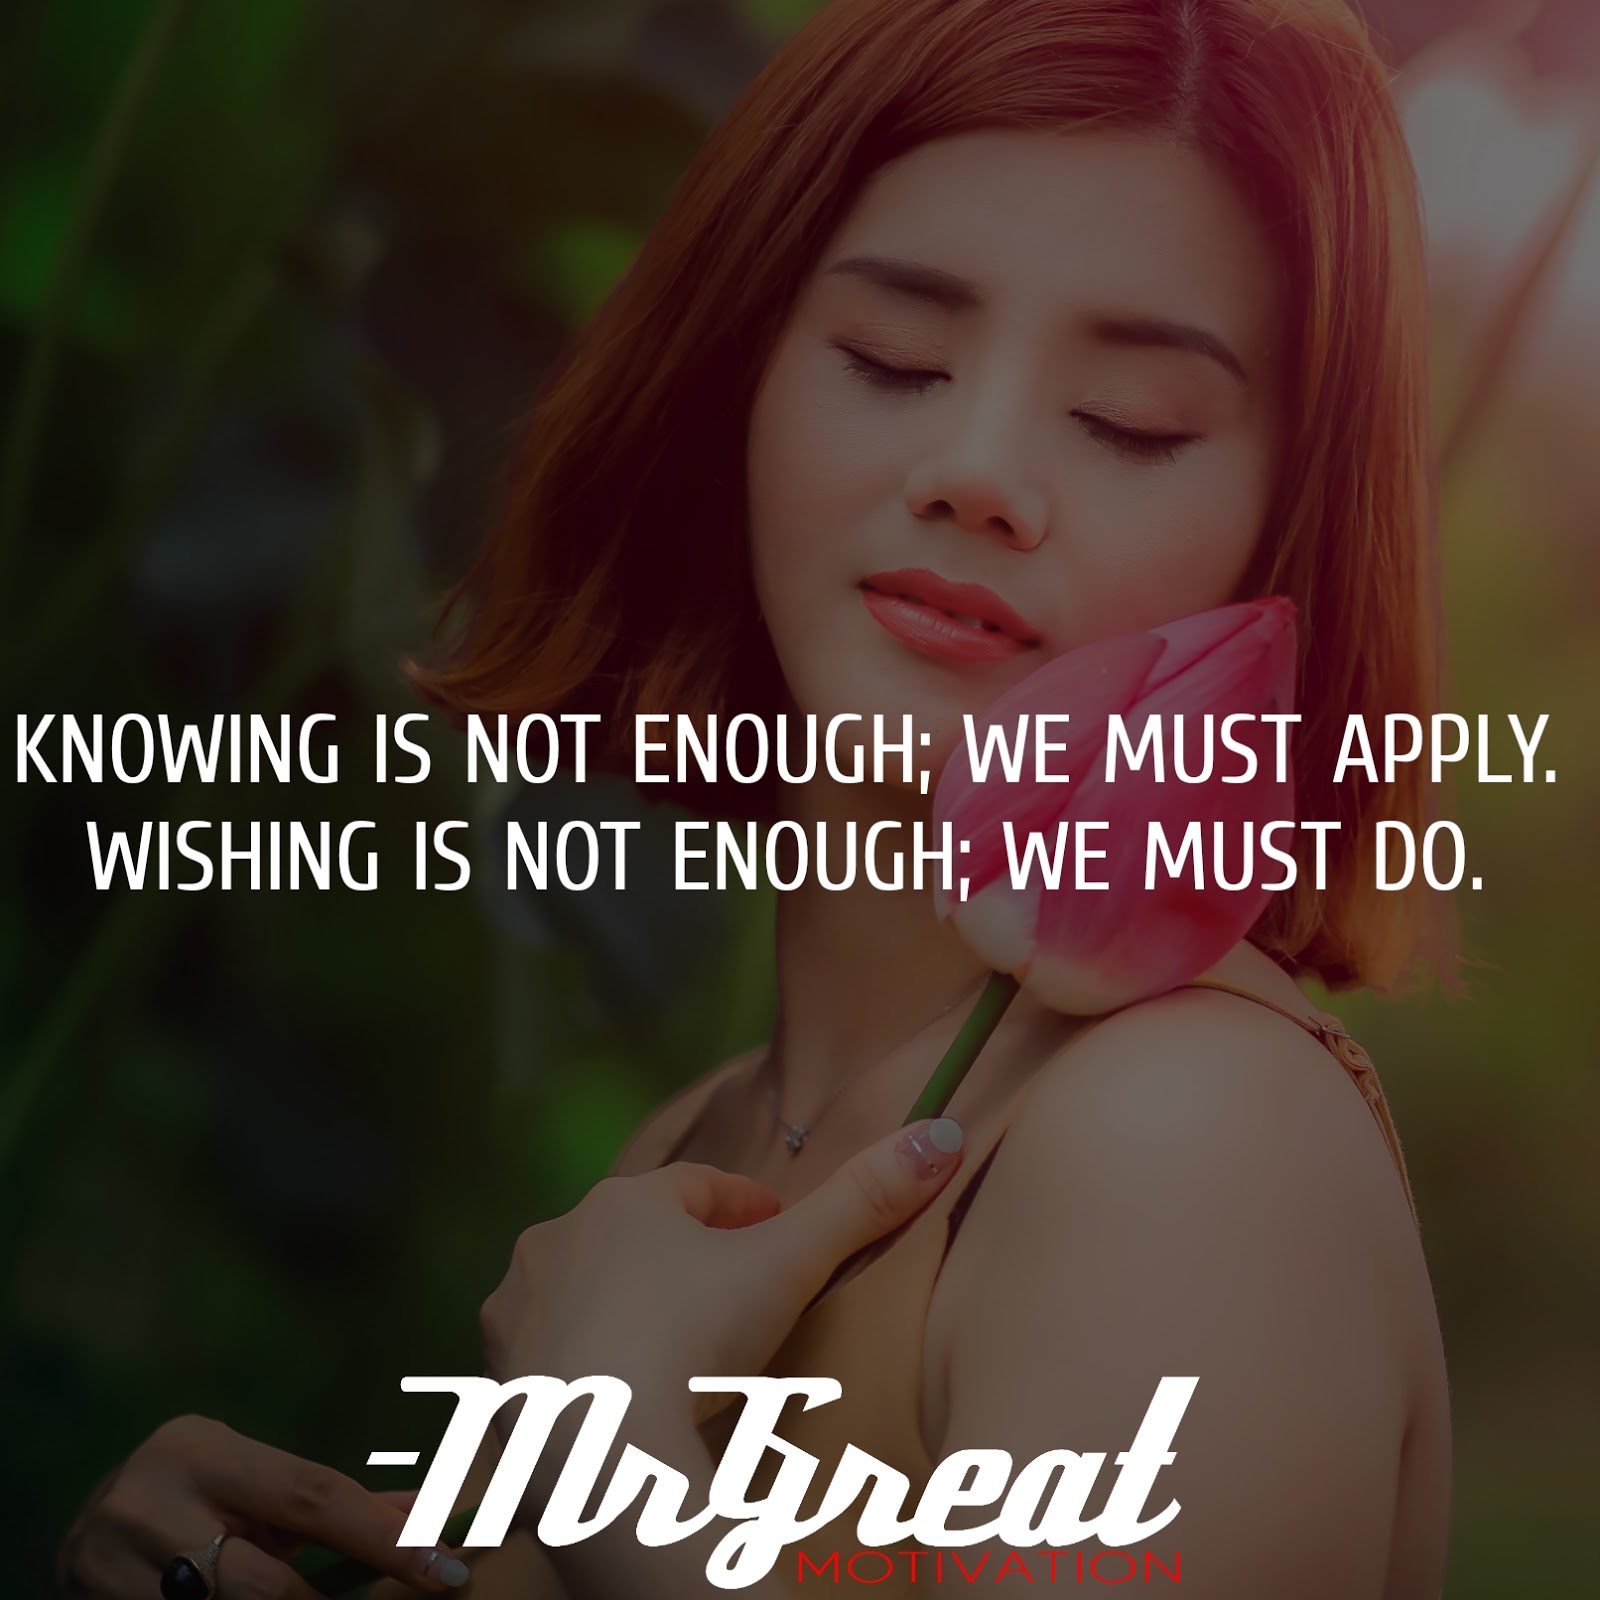 Knowing is not enough; we must apply. Wishing is not enough; We must do - Johann W. Goethe